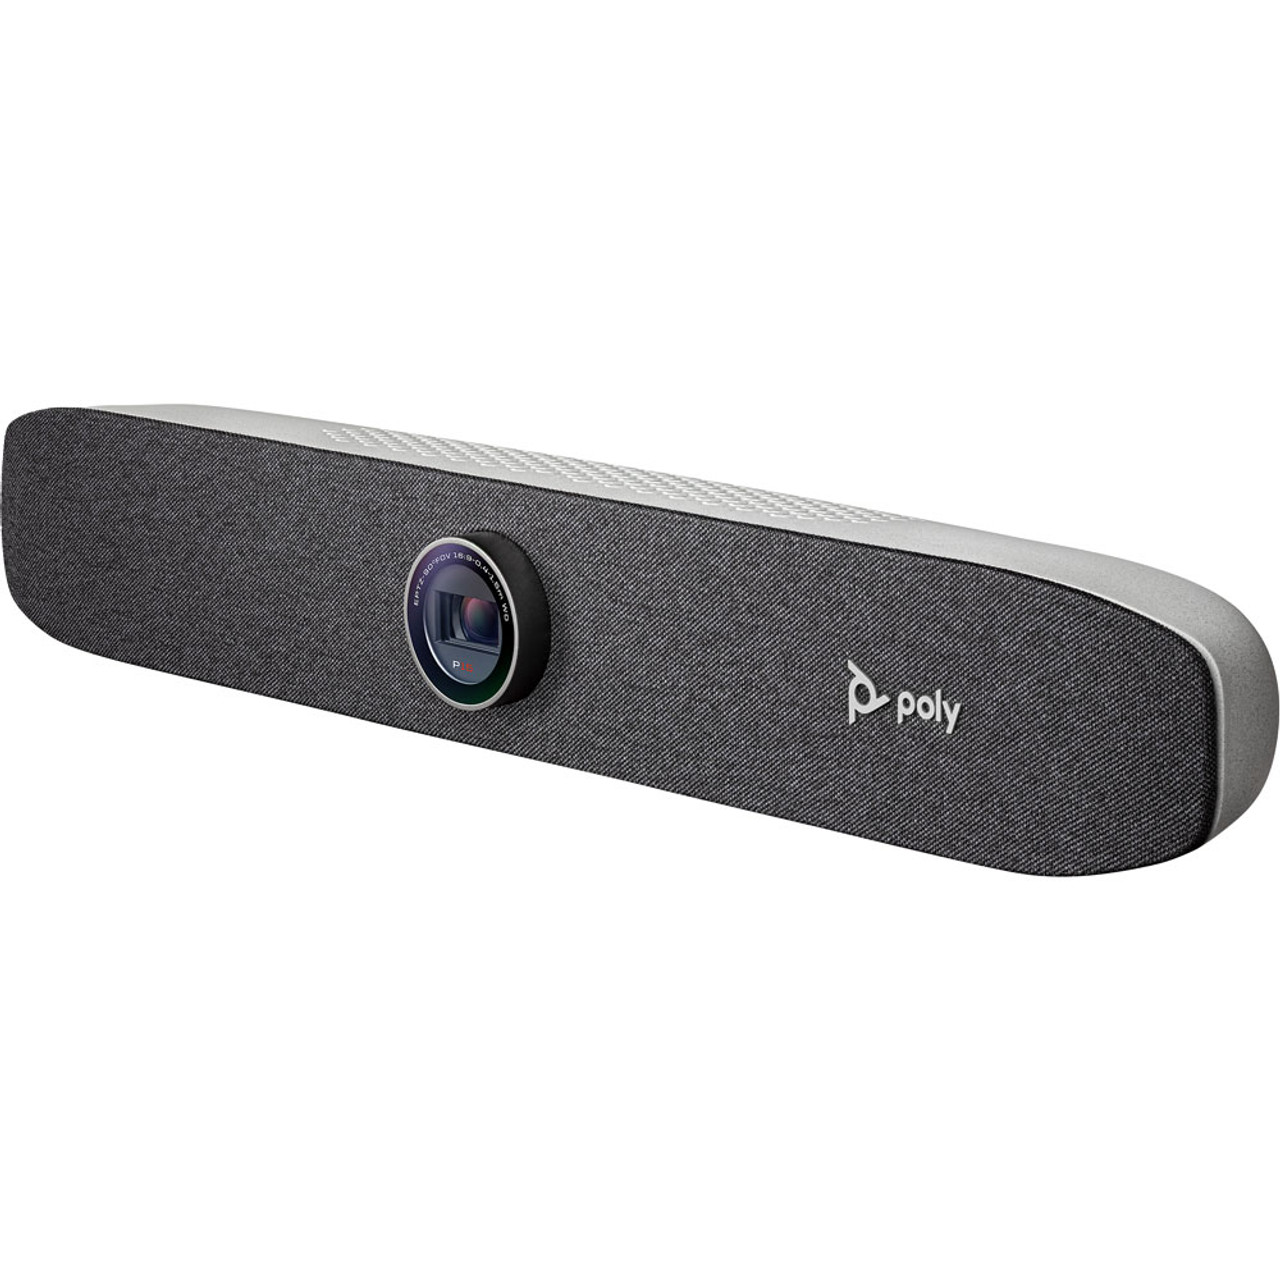 Poly Studio - Small-Medium Room Kit - video conferencing kit - no PC -  7230-87710-001 - Video Conference Systems 